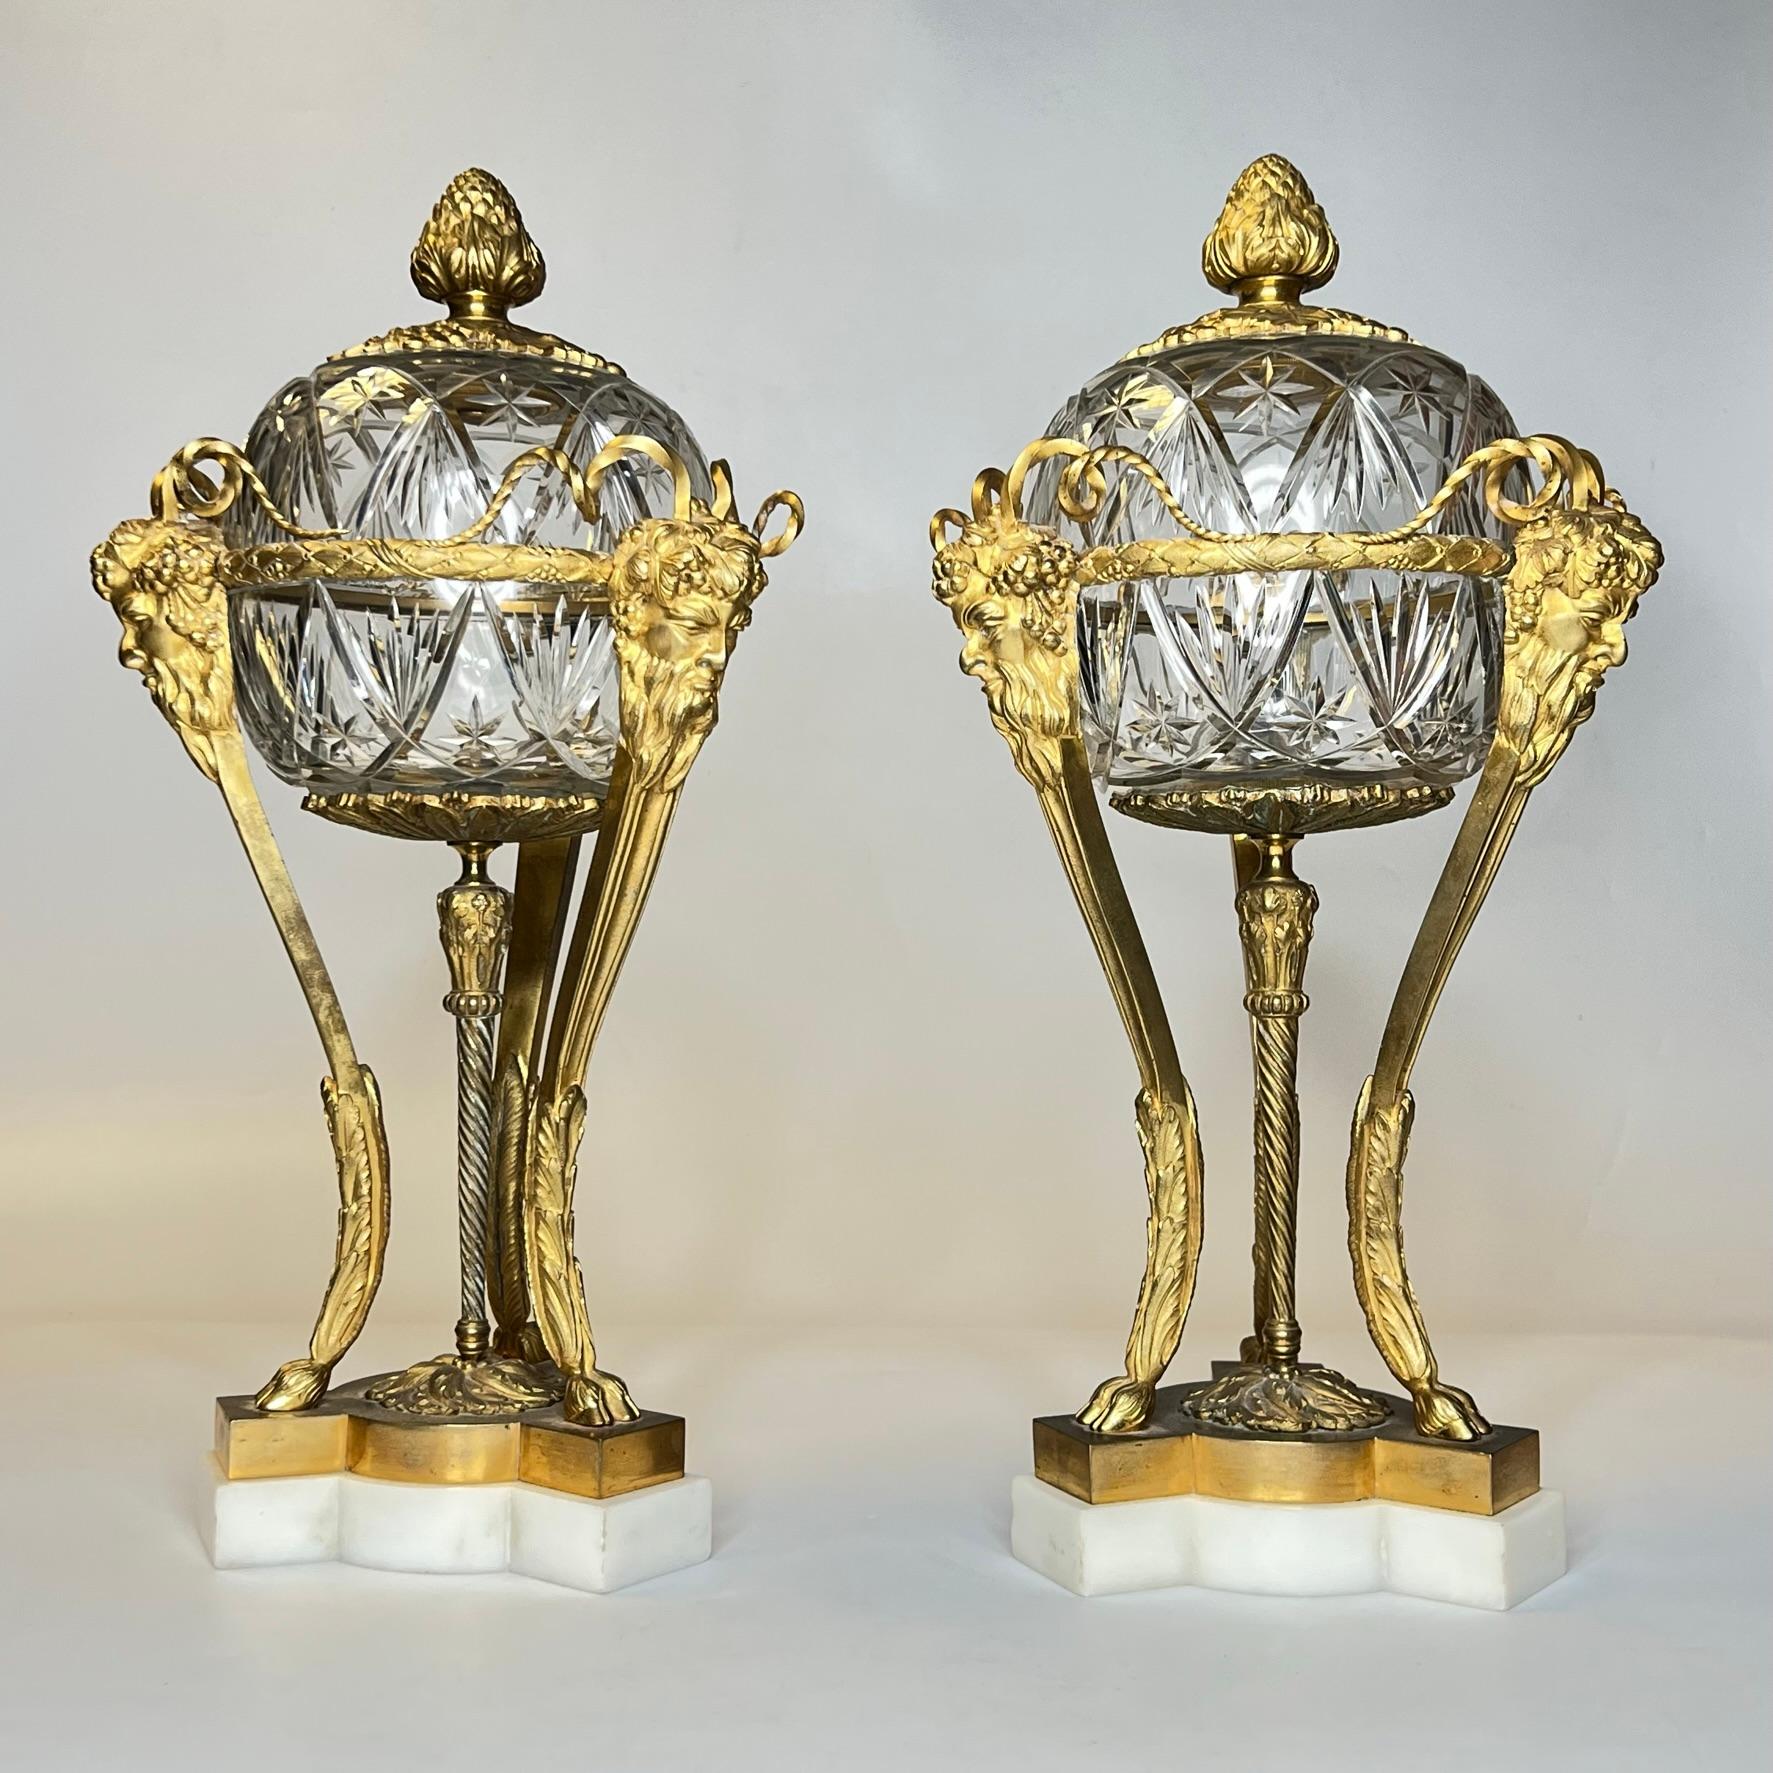 Our pair of cassolettes in the Louis XVI style have the form of neoclassical atheniennes crafted from gllt bronze mounted to cut white marble pedestals, and feature finely cut glass bowls and lids. Very good condition, with just a couple small chip